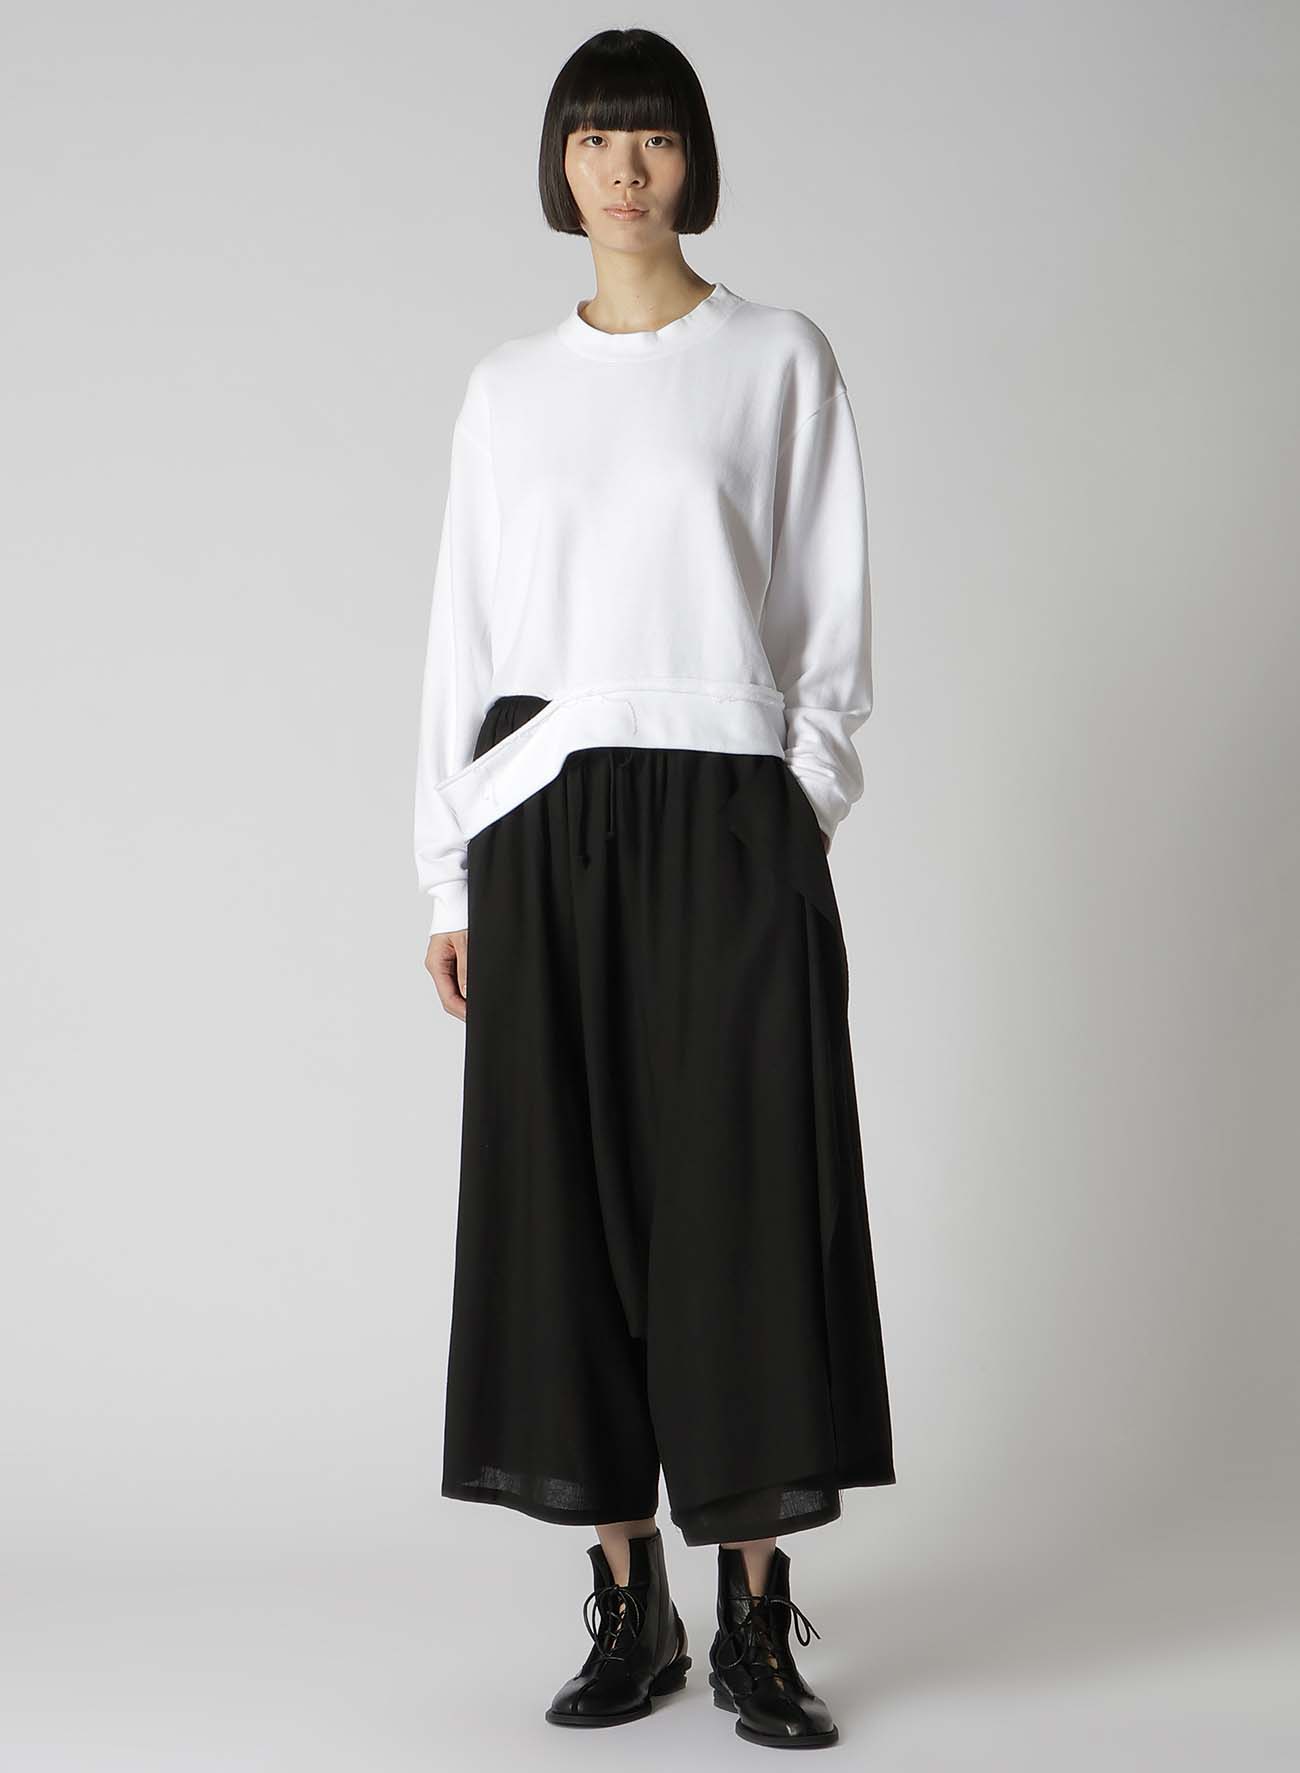 SOFT FRENCH TERRY CROPPED SWEATSHIRT